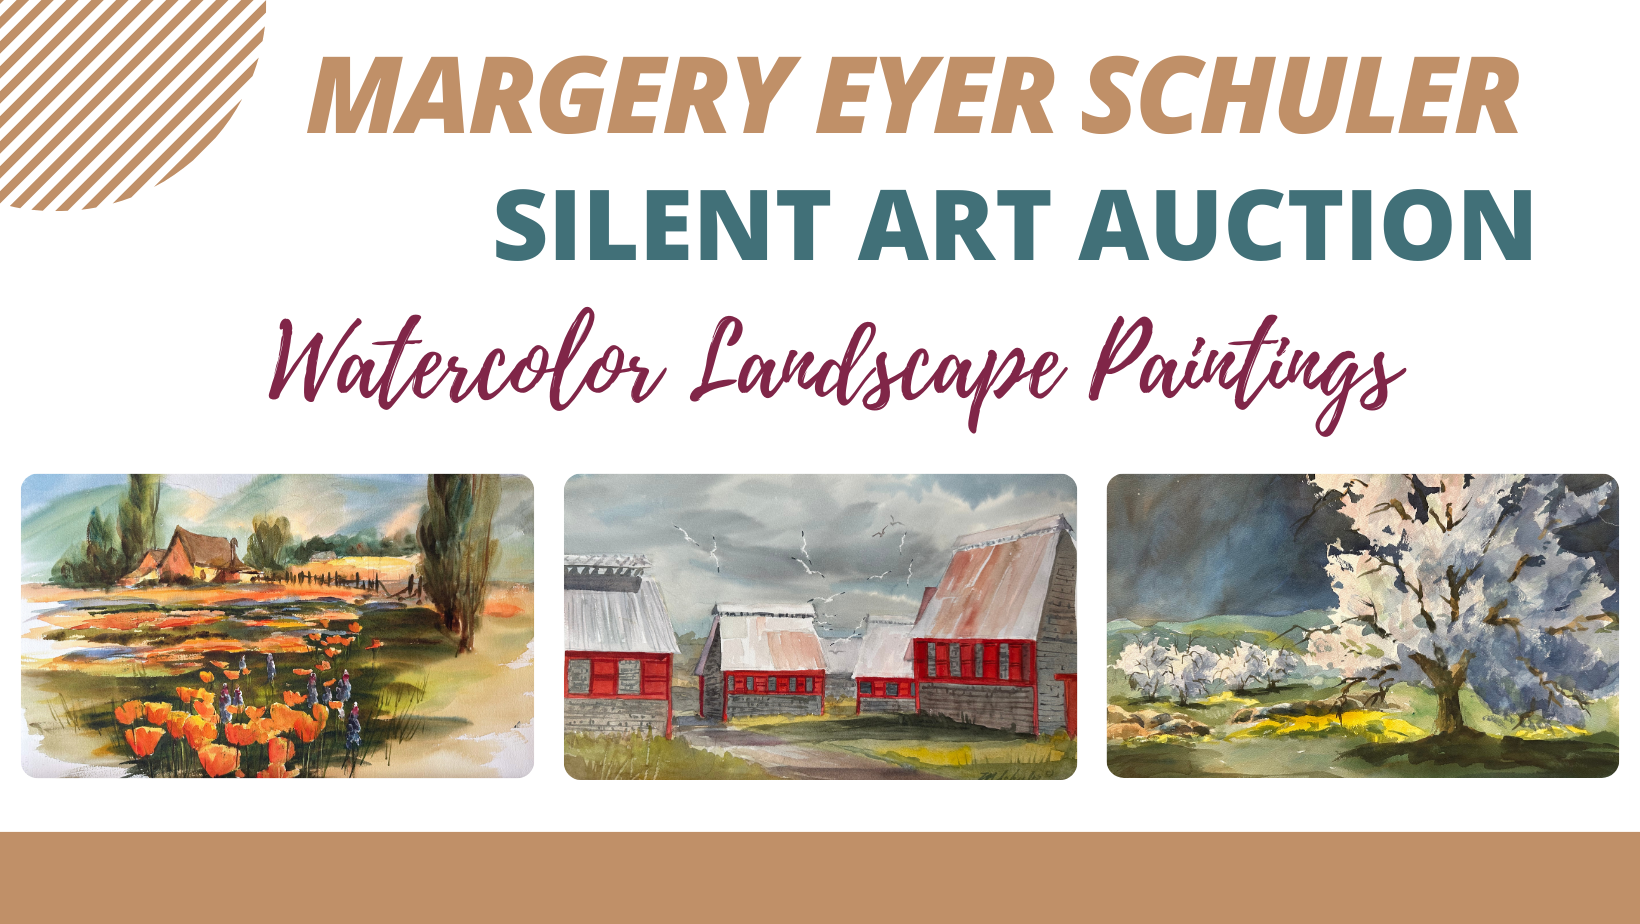 Margery Schuler Art Work and Silent Auction Information